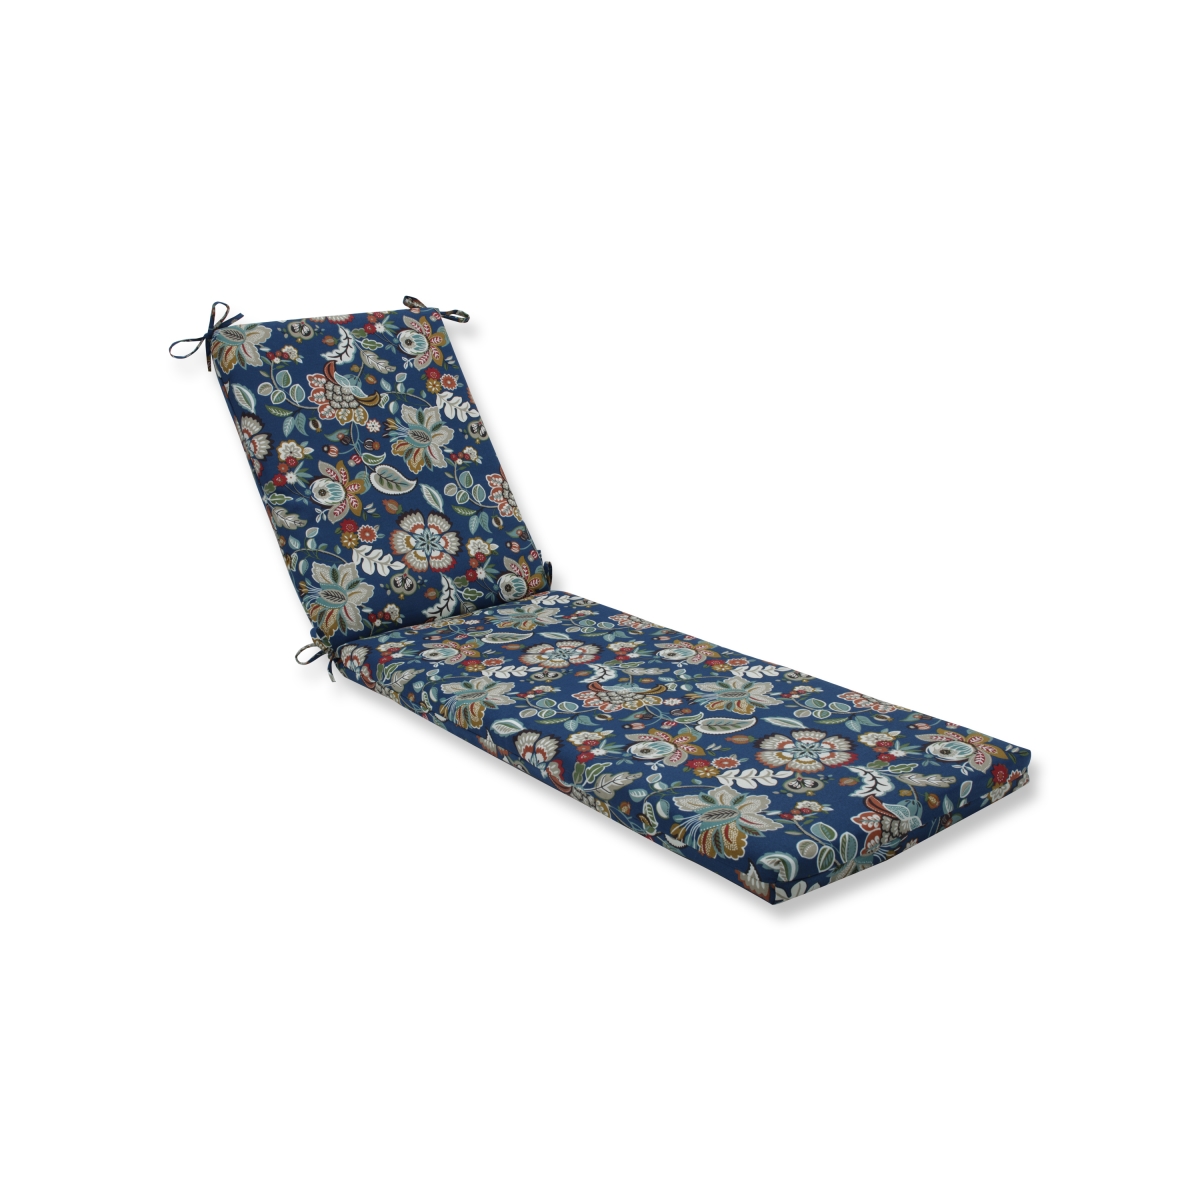 615578 80 X 23 X 3 In. Outdoor & Indoor Telfair Peacock Chaise Lounge Cushion, Blue